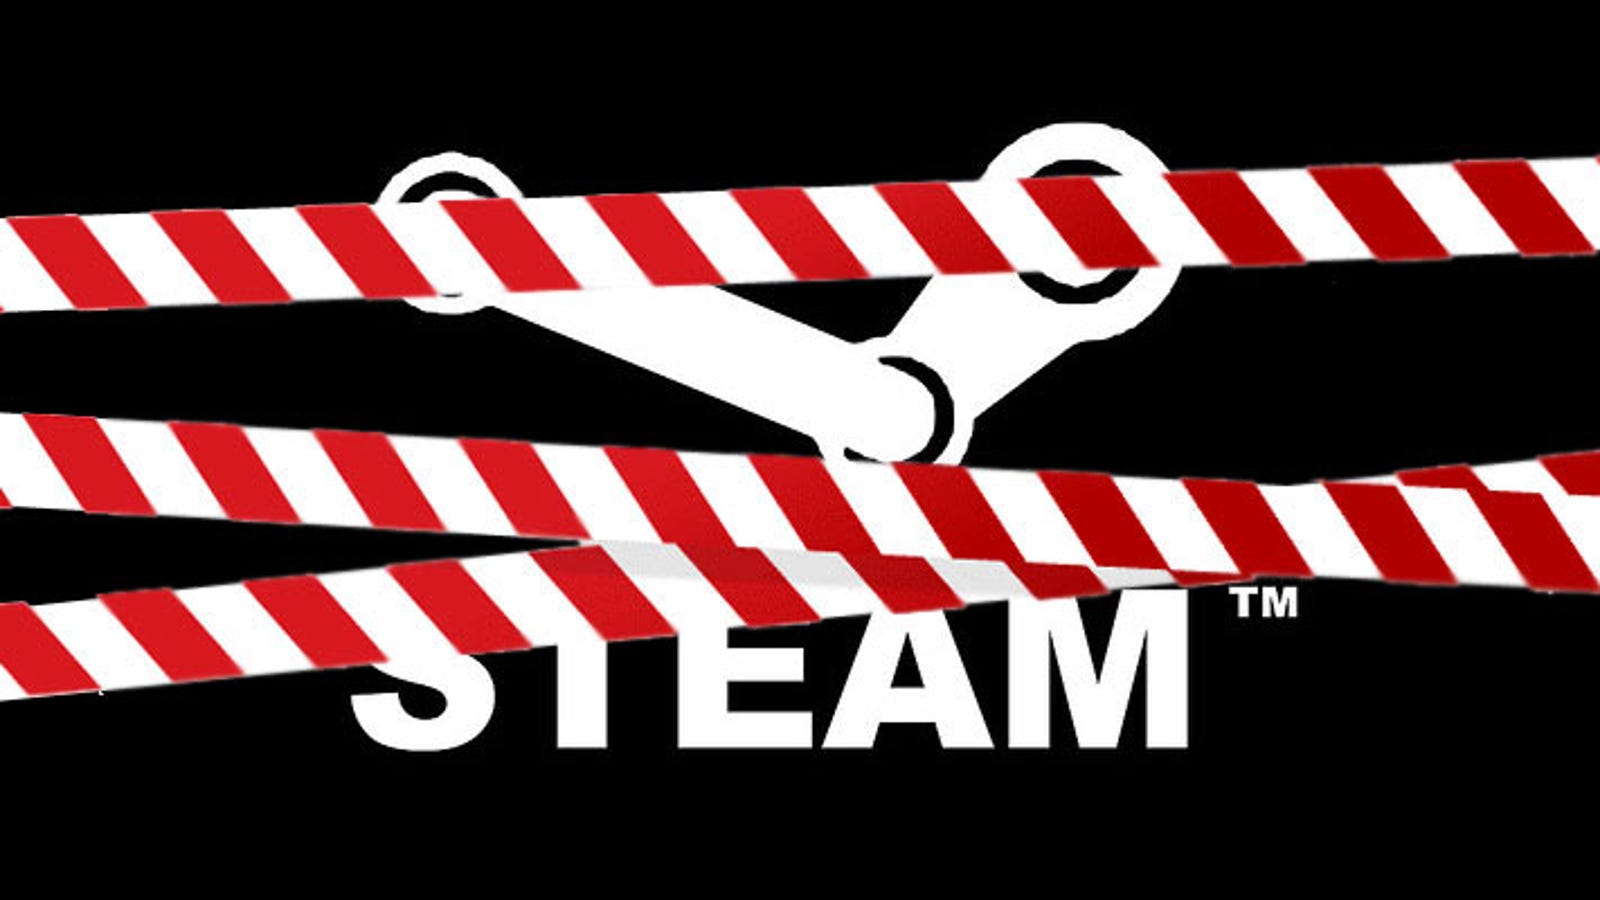 Is steam down фото 91